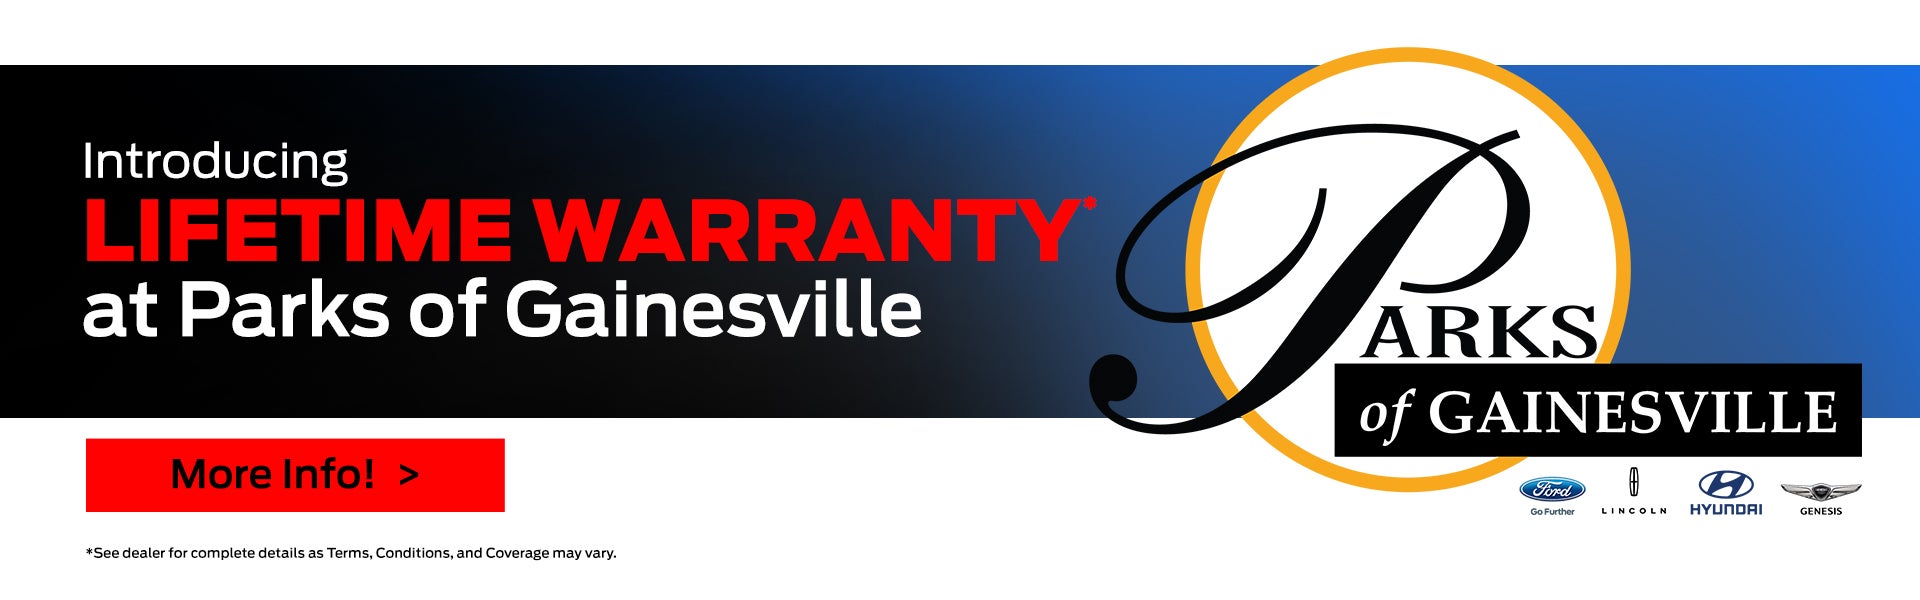 Lifetime Powertrain Warranty at Parks Ford of Gainesville